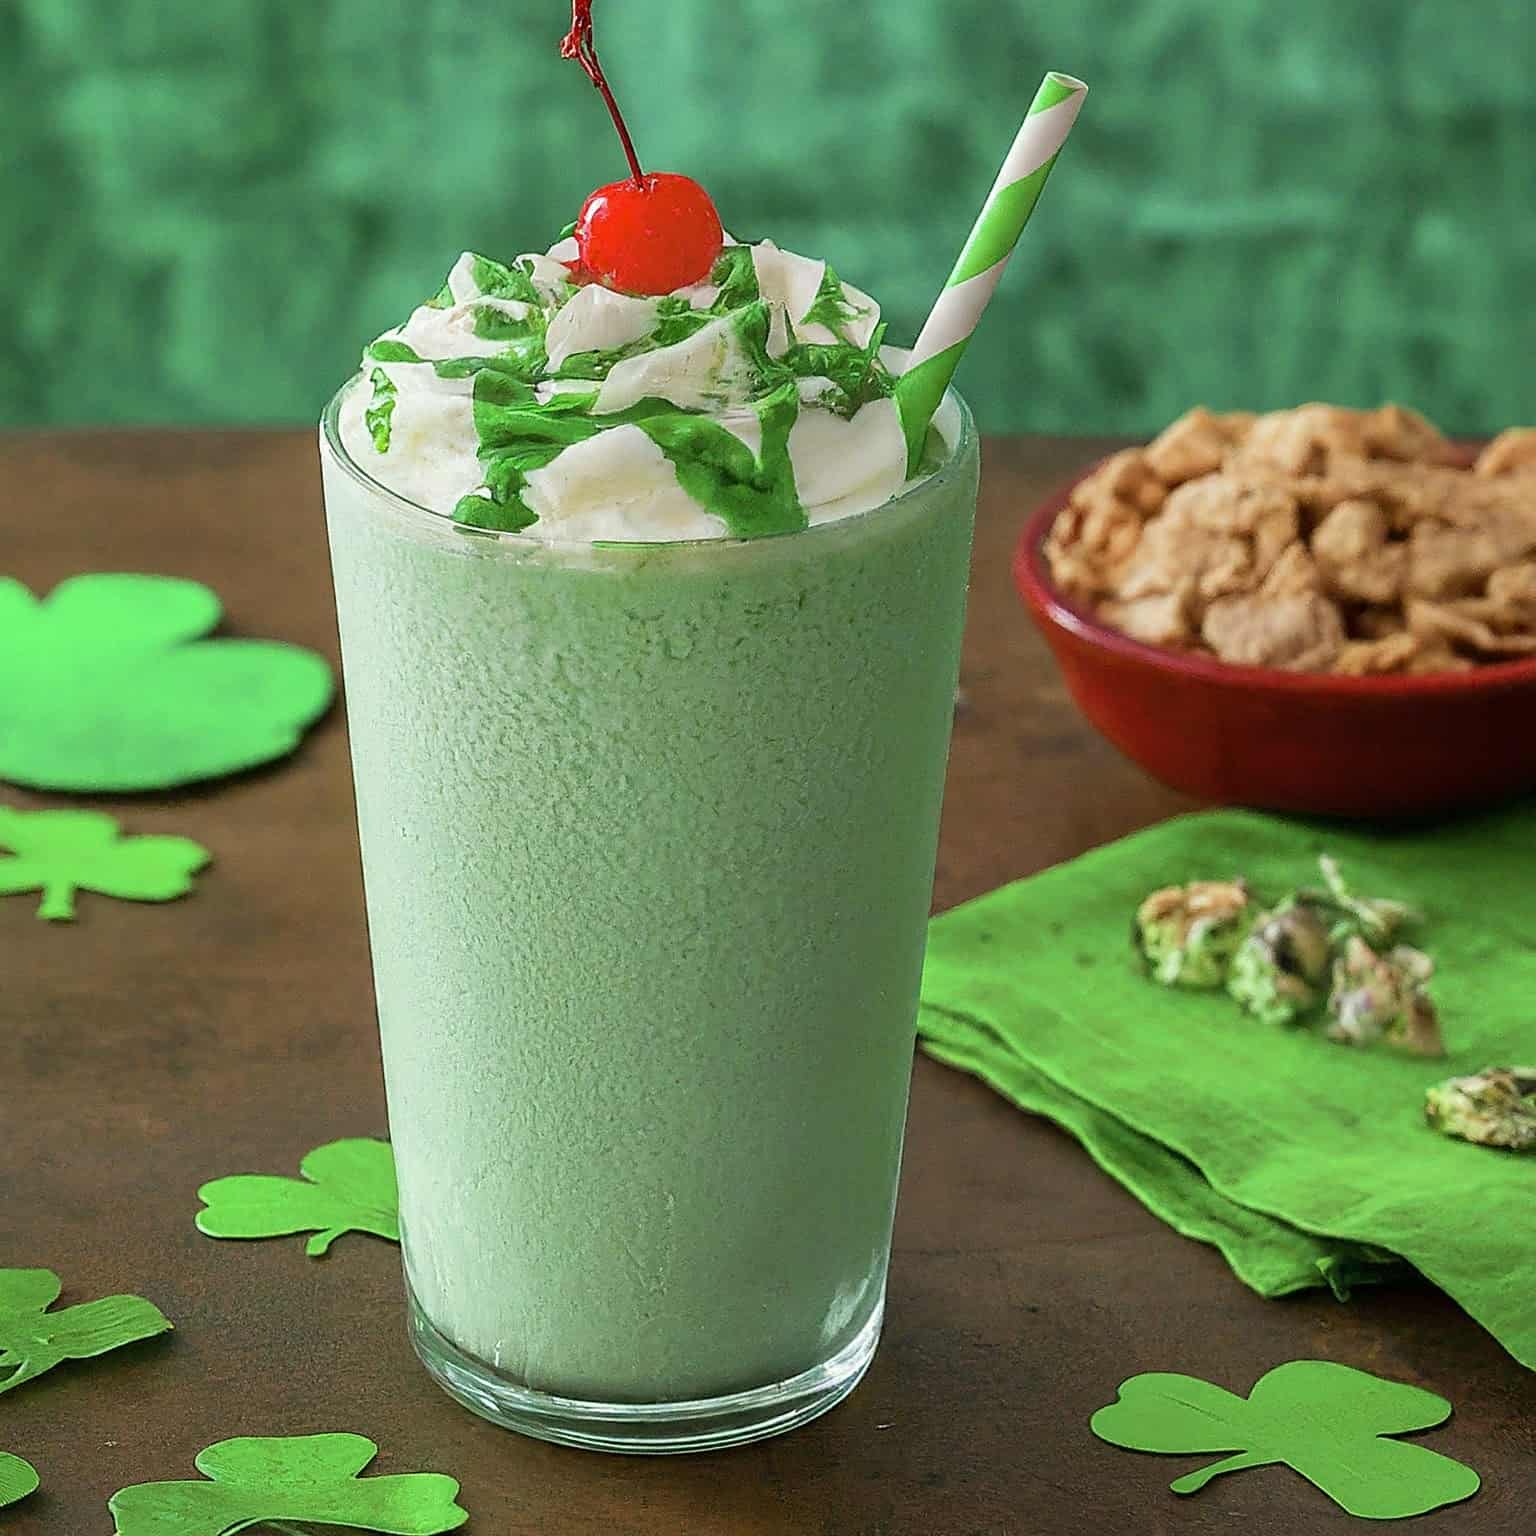 Shamrock Shake in a glass cup with a piece of cherry on it and straw inside.